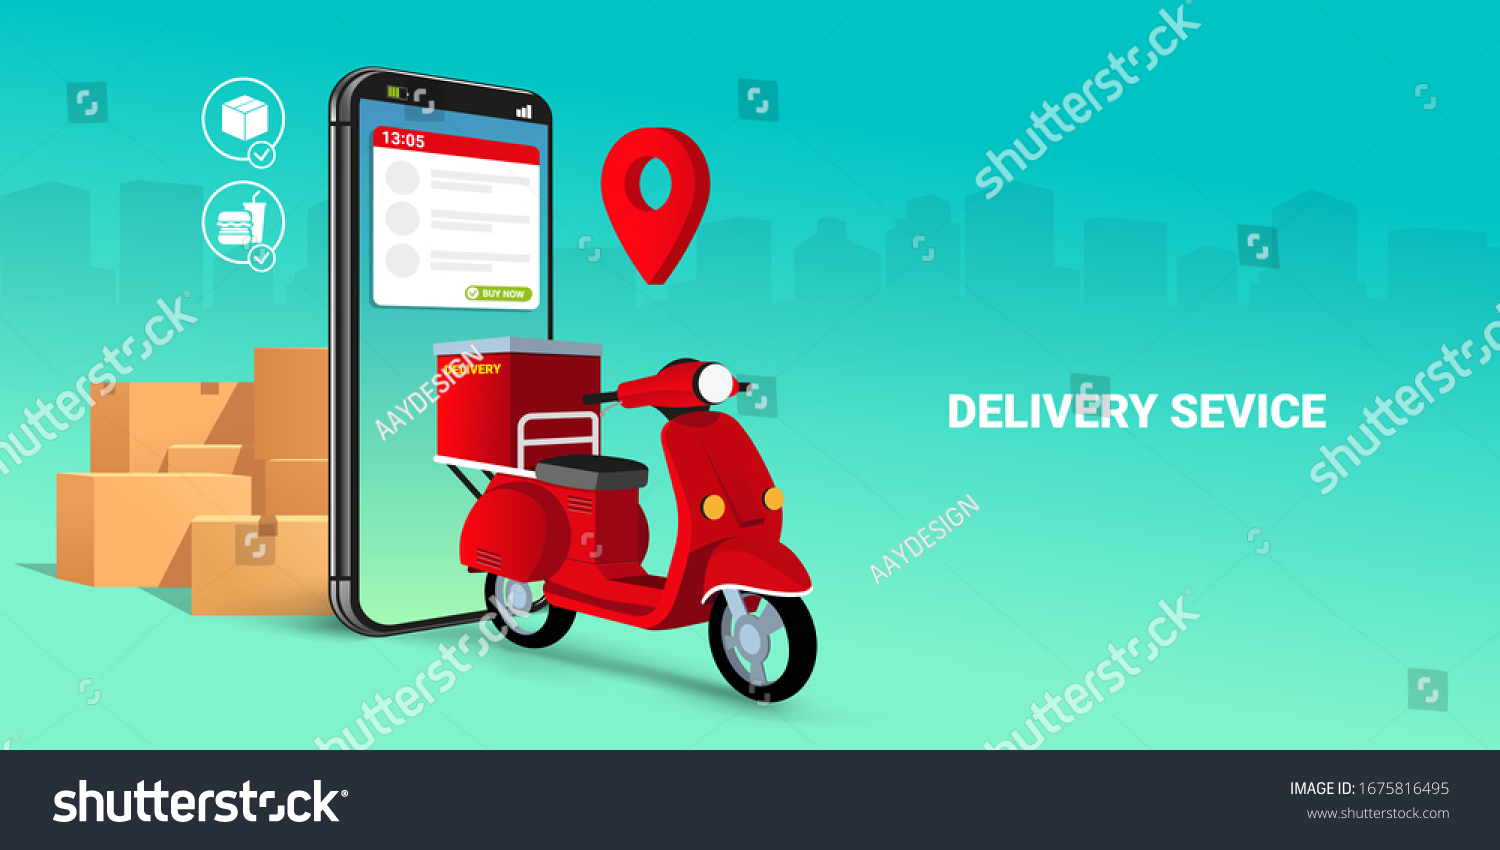 Fast delivery by scooter on mobile. E-commerce concept. Online food or pizza order and packaging box infographic. Webpage, app design. green gradient city background. Perspective vector illustration #1675816495